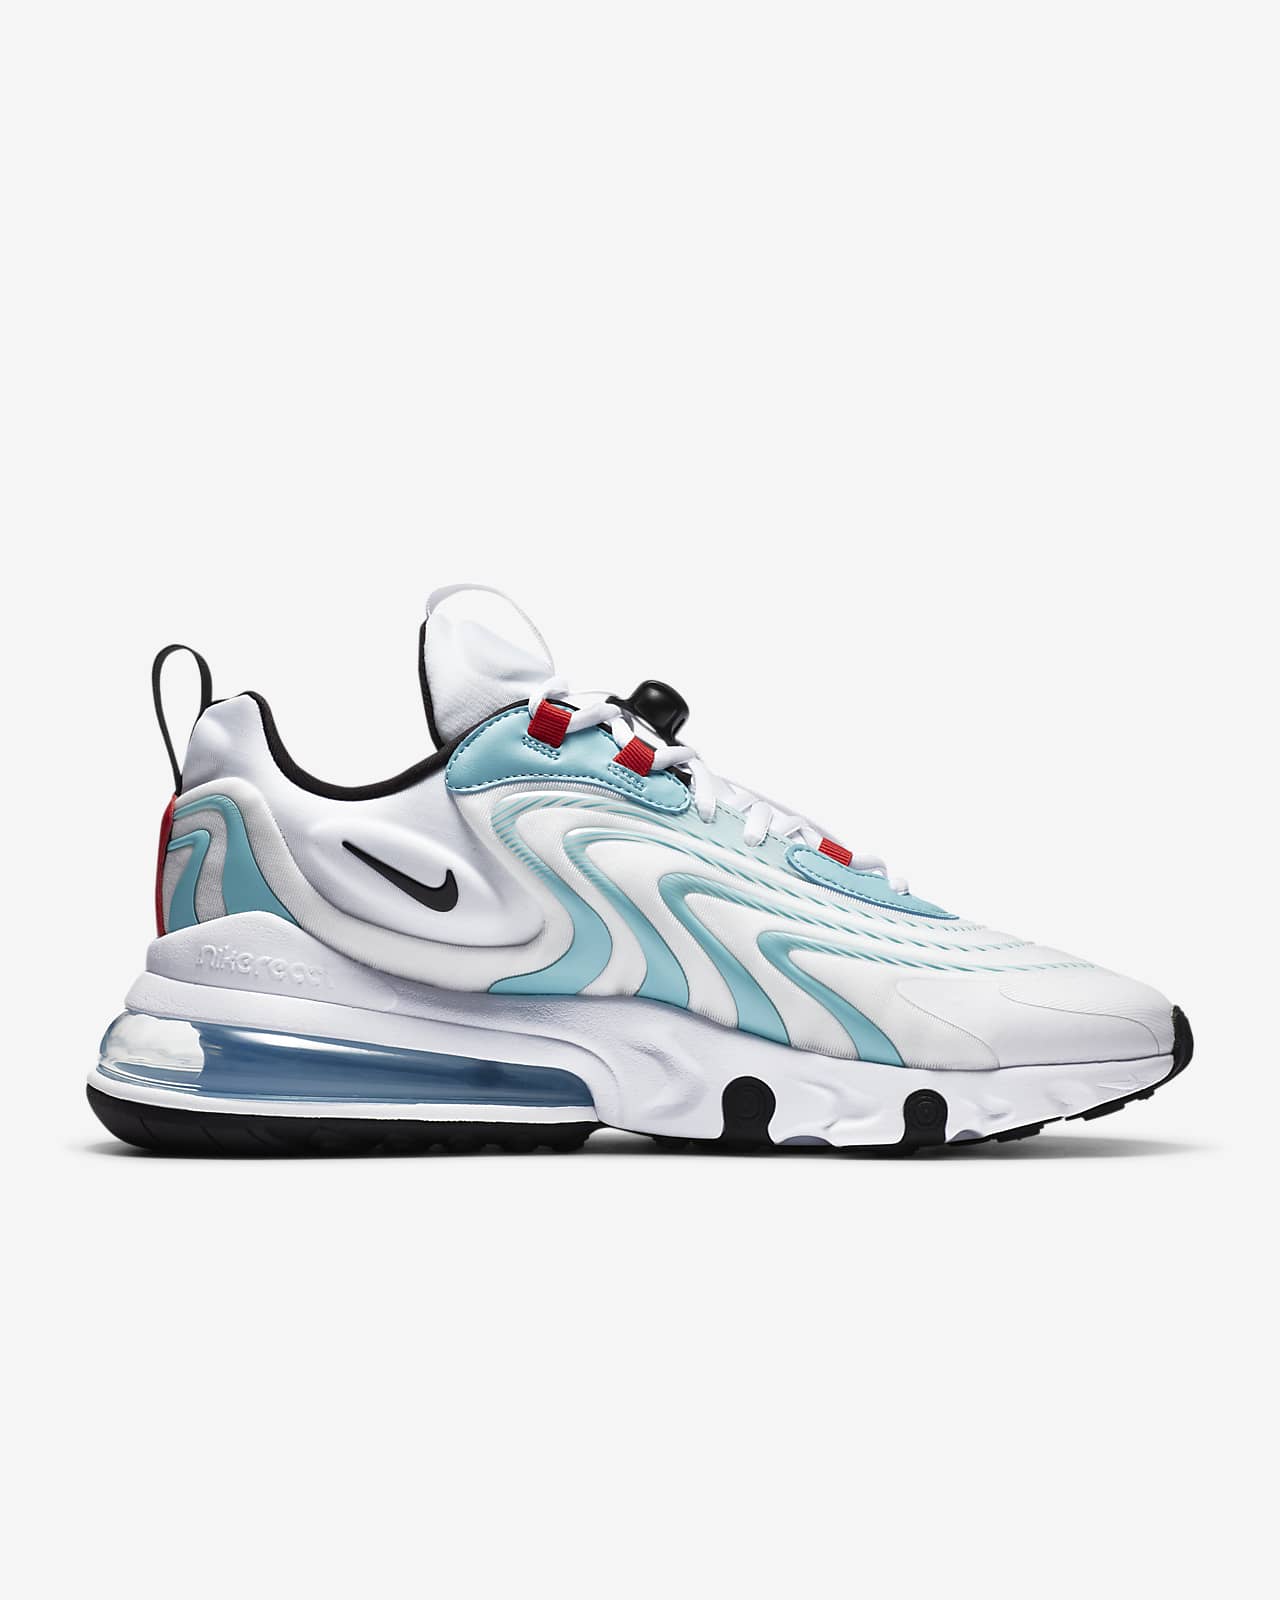 the new nike air max 270